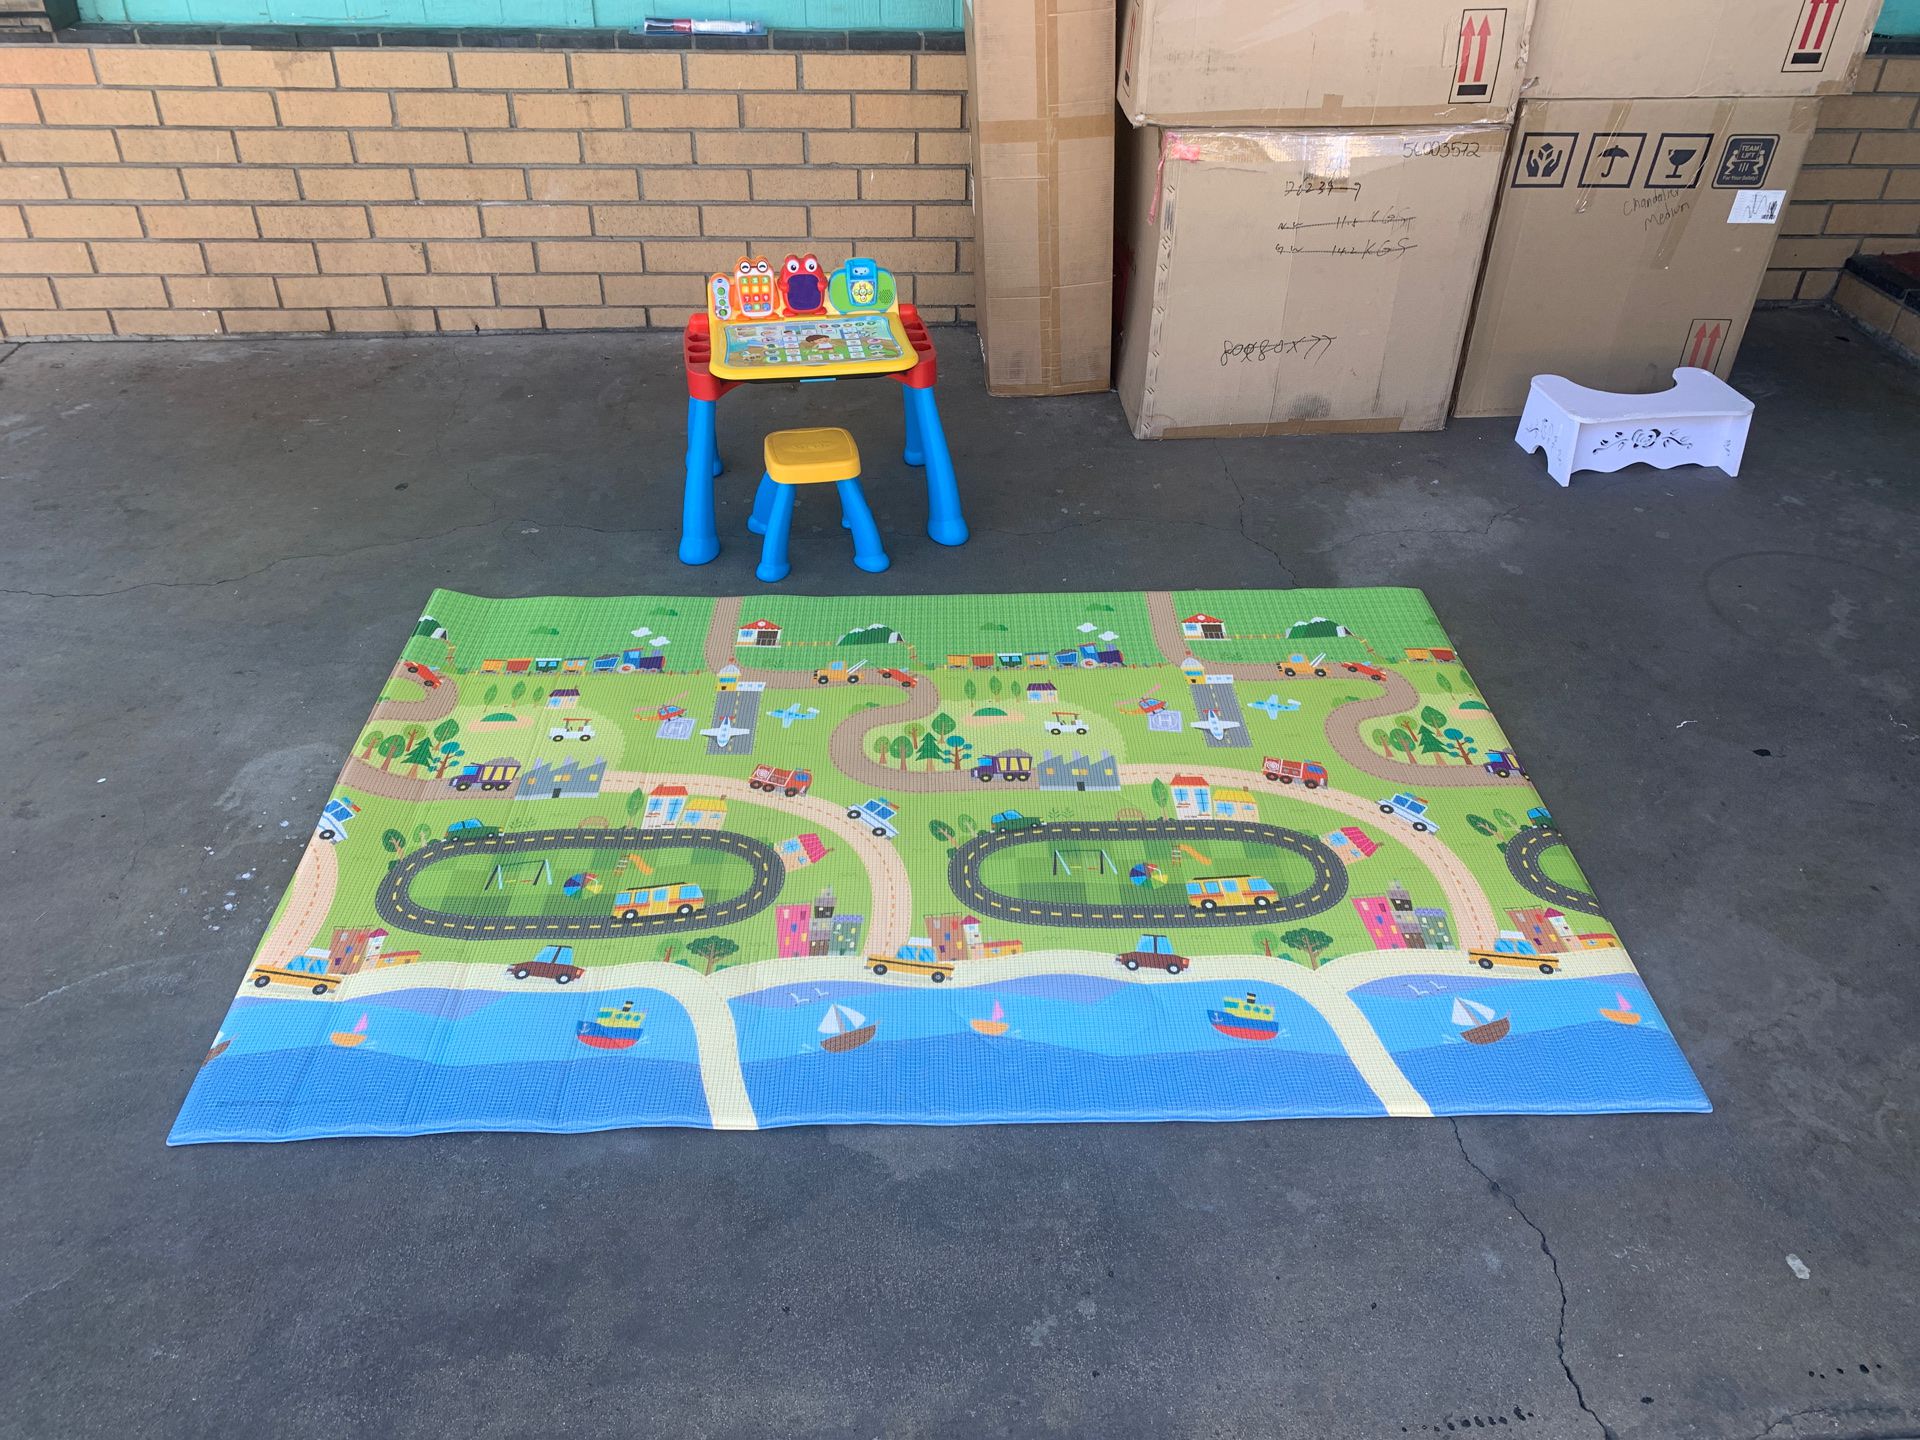 Doulble sided mat and kids stool with VTech learning desk